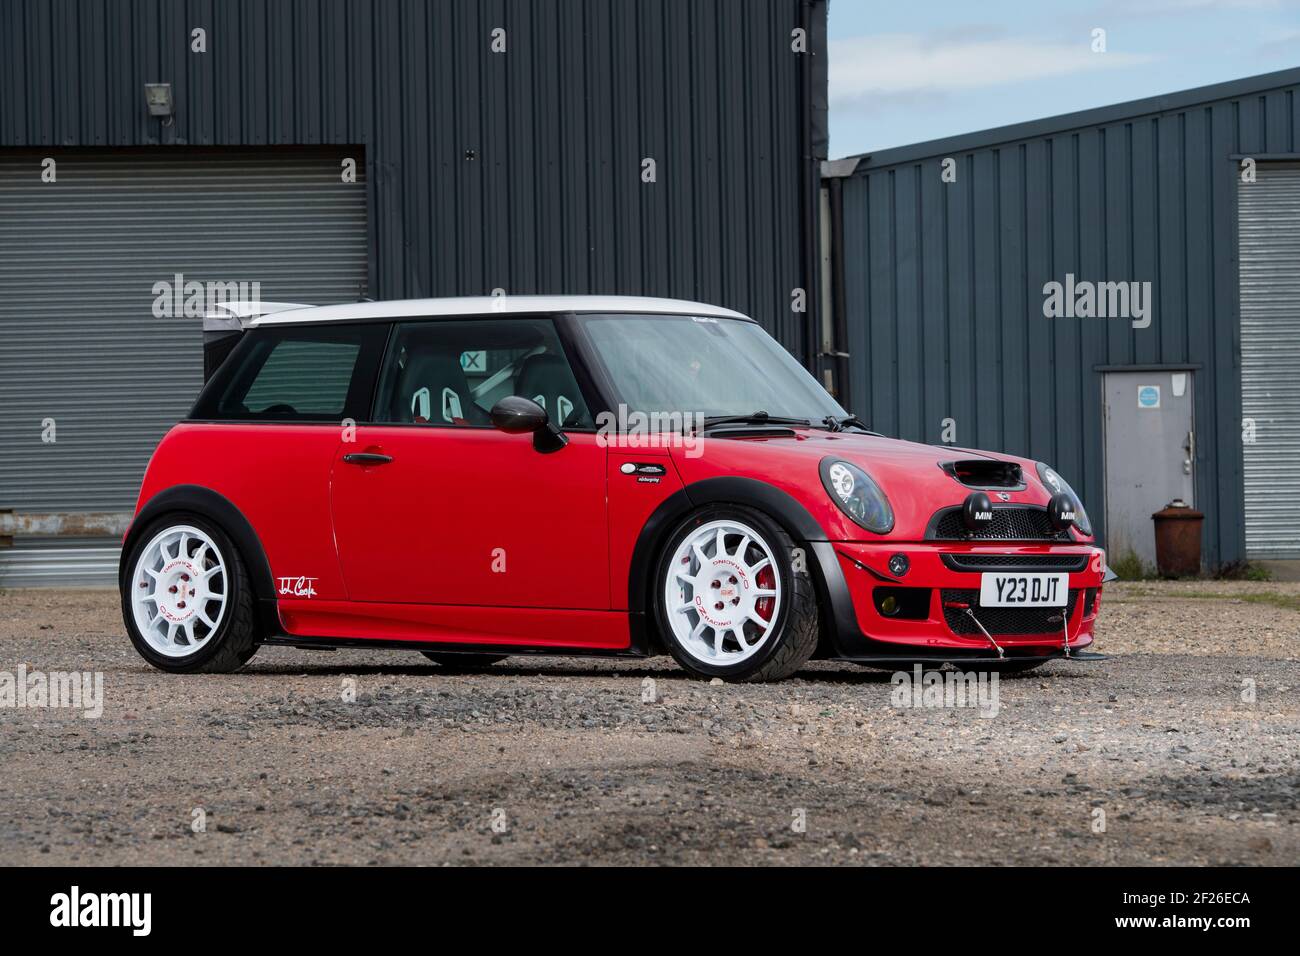 R53 Mini Cooper S, first generation BMW Mini with tuning modifications  Stock Photo - Alamy